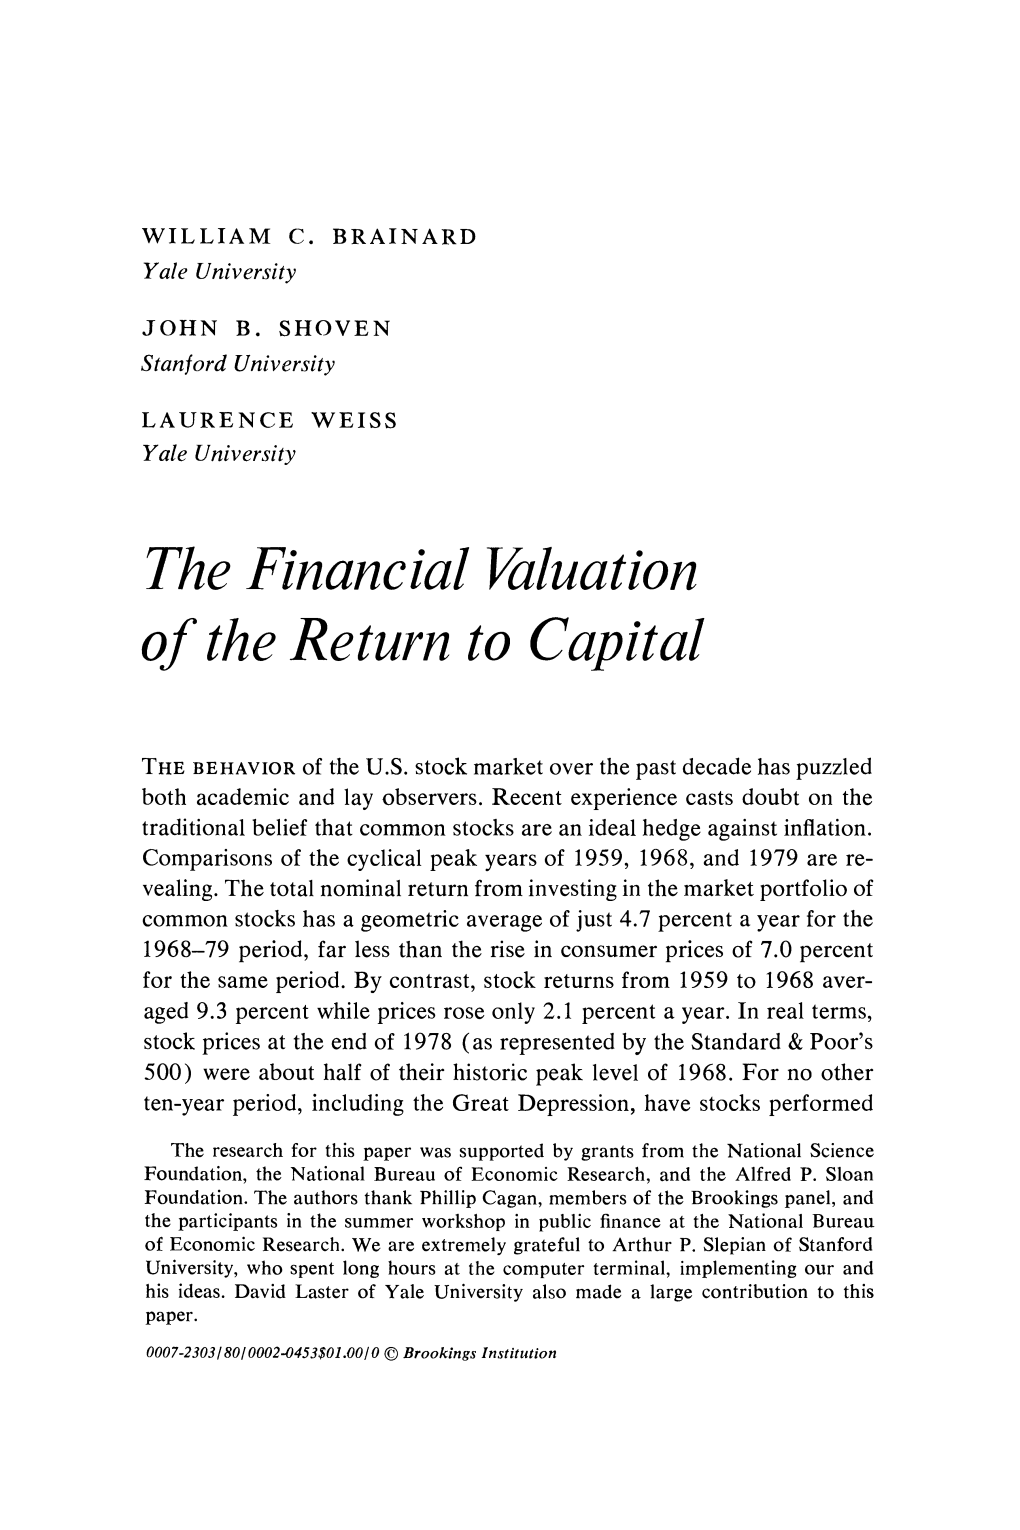 The Financial Valuation of the Return to Capital